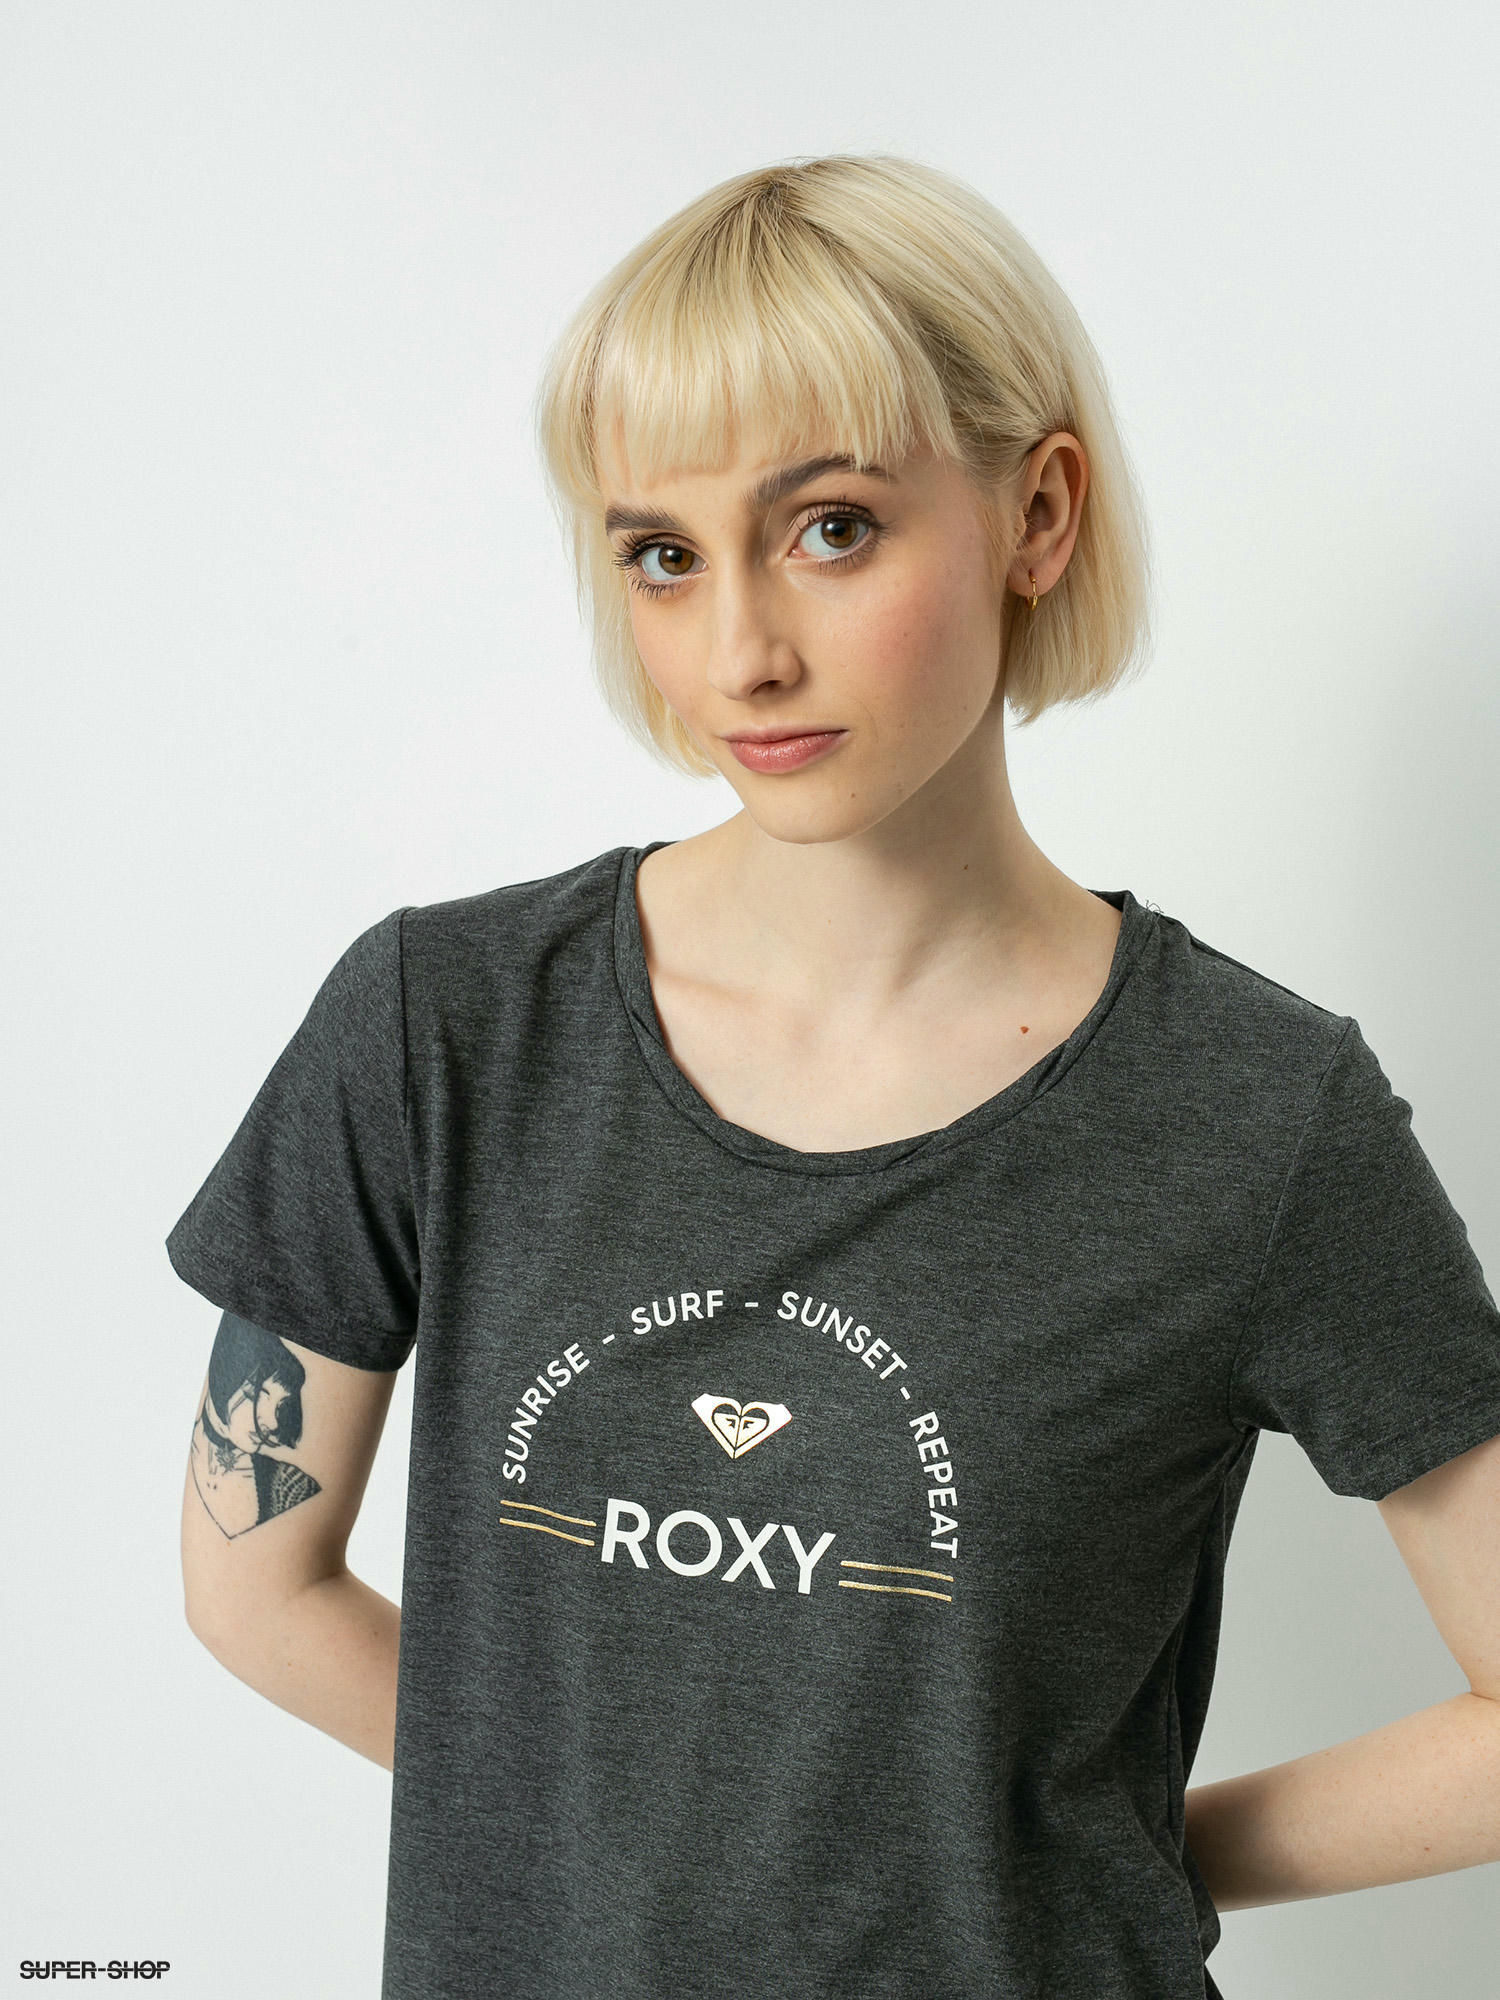 The Roxy Chasing A Wmn Swell (anthracite) T-shirt